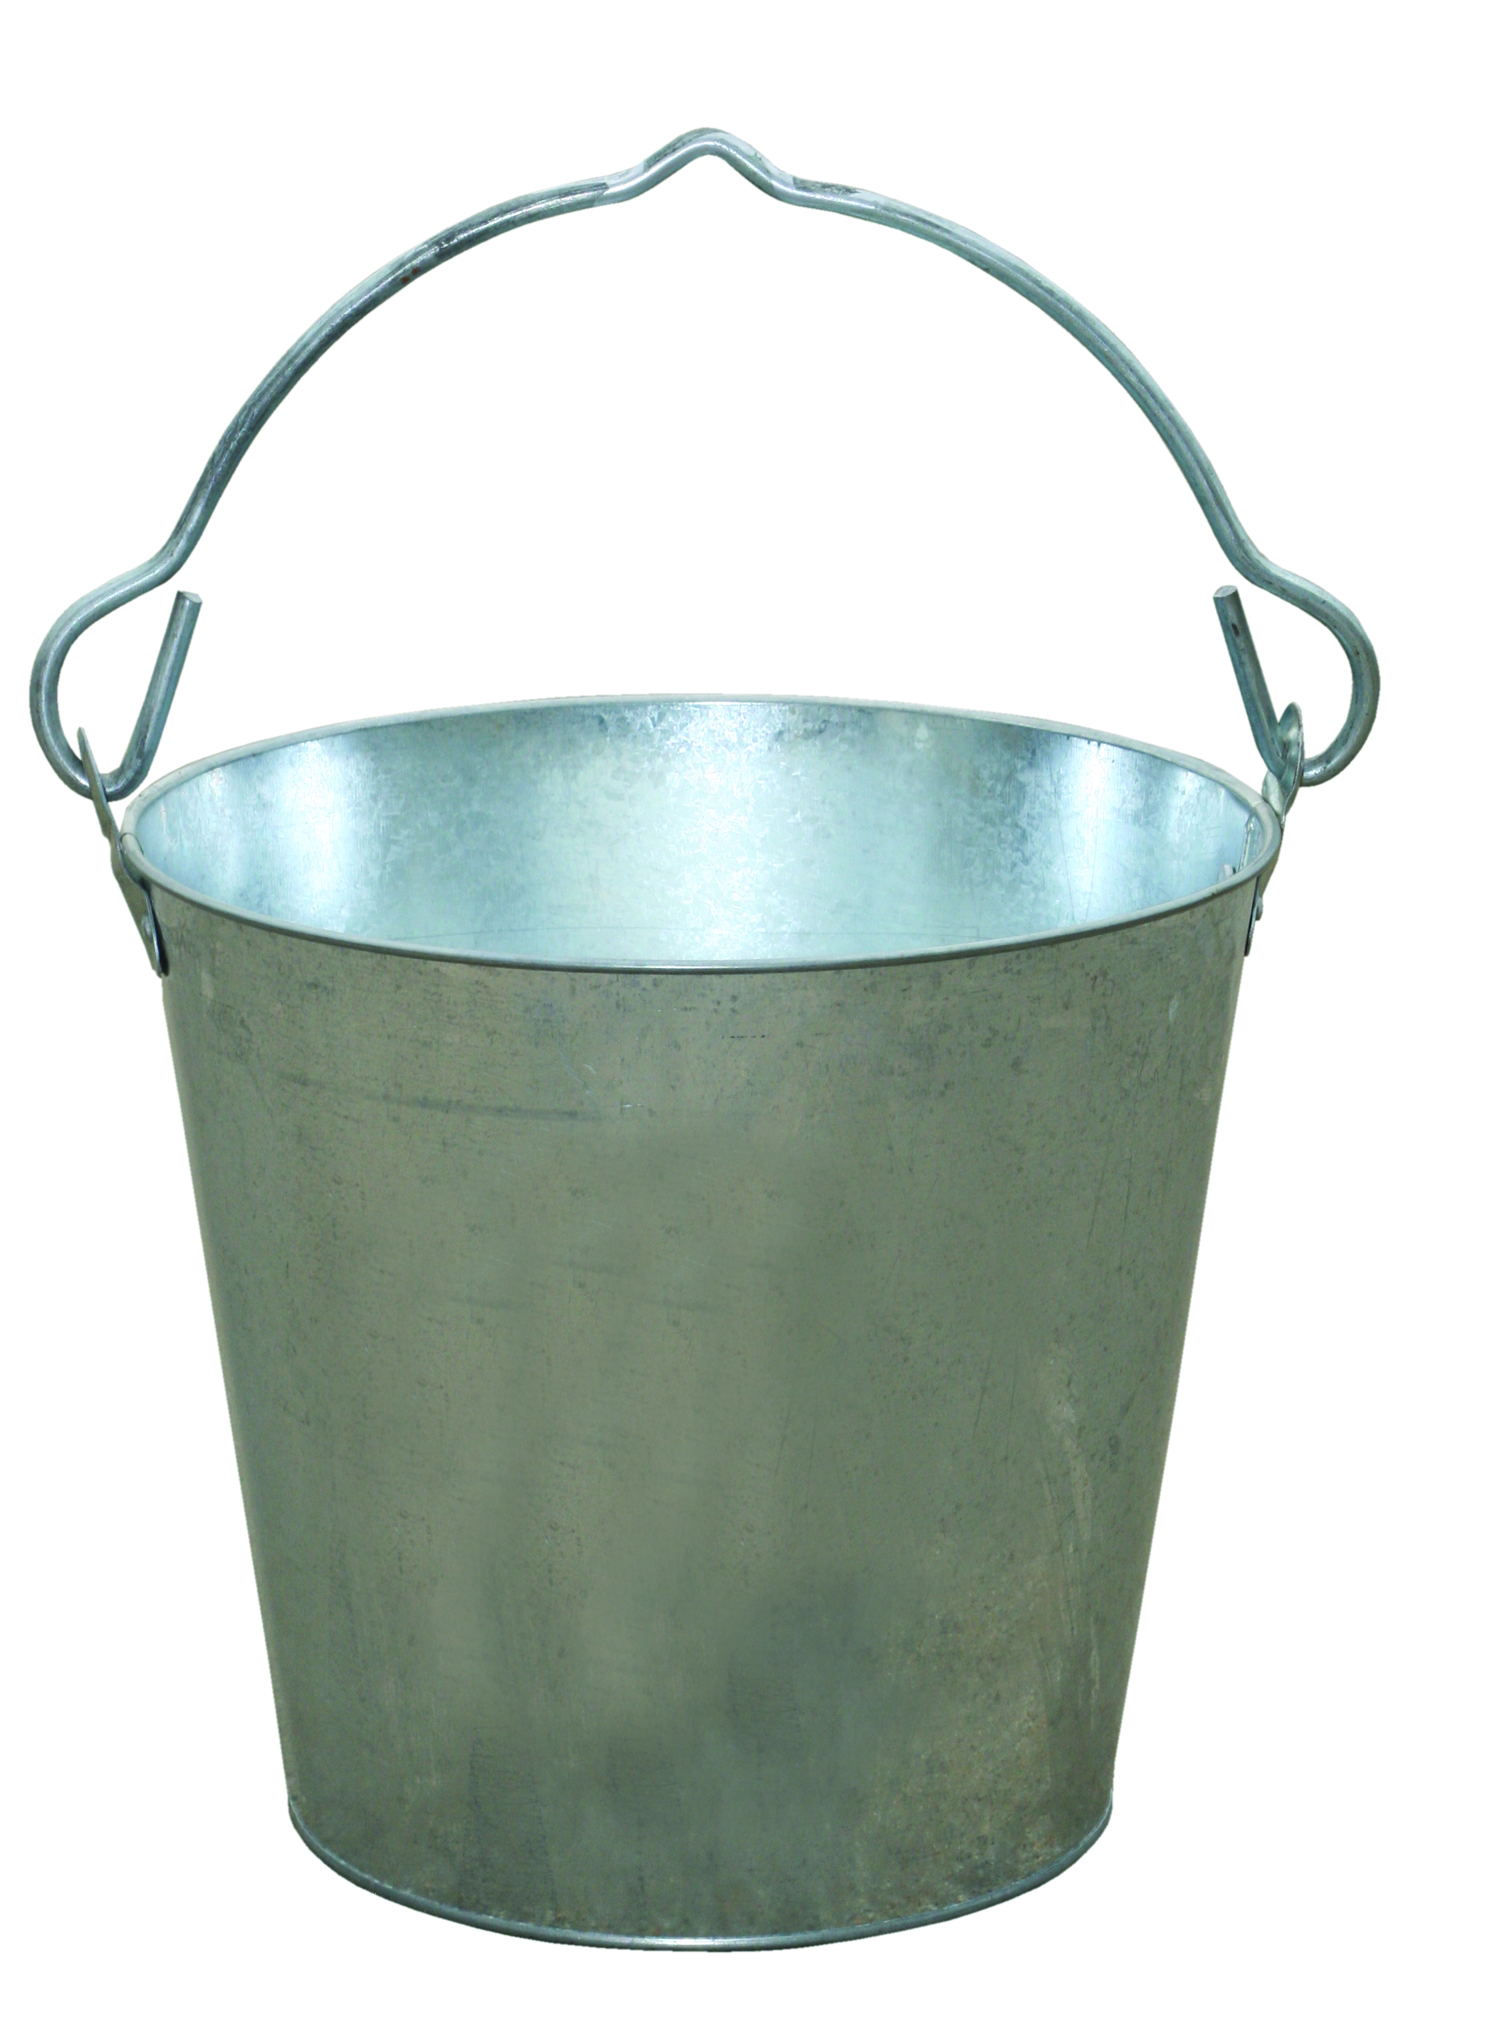 Metal Utility Bucket with Handle for Gardening & Farming Item No. GP14 LITTLE GIANT Galvanized Dairy Pail 14 Quart 